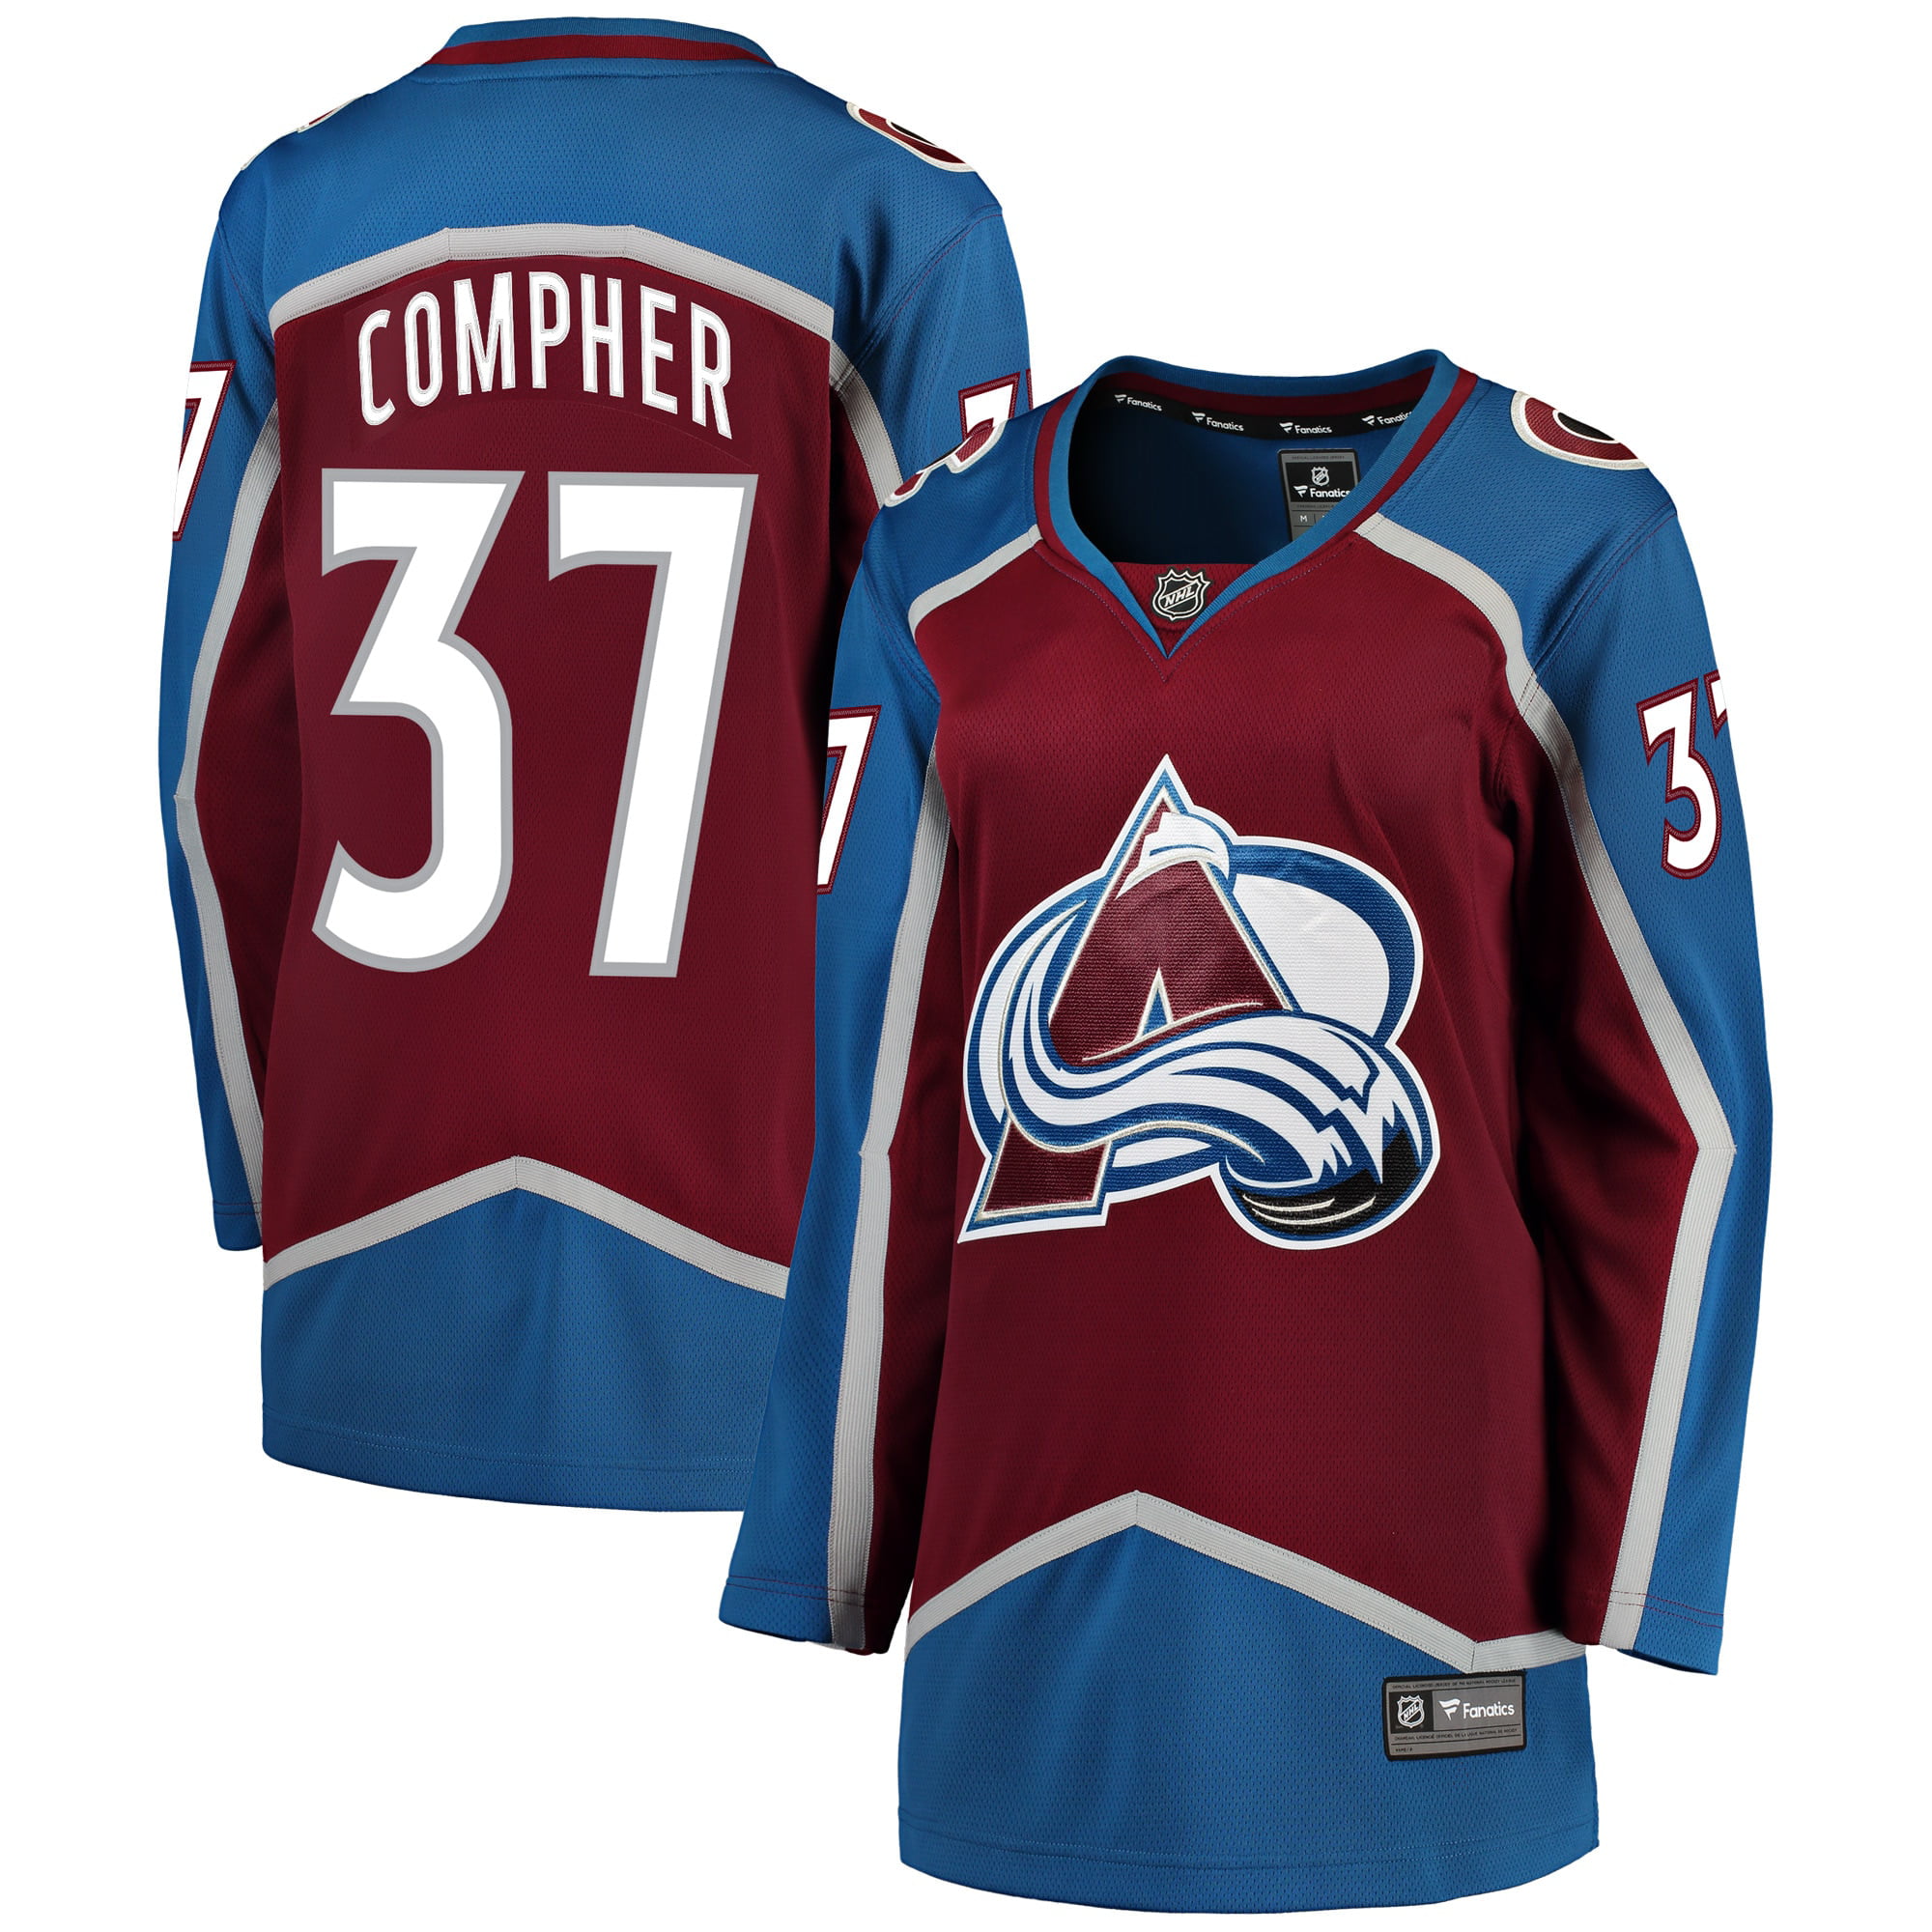 jt compher jersey